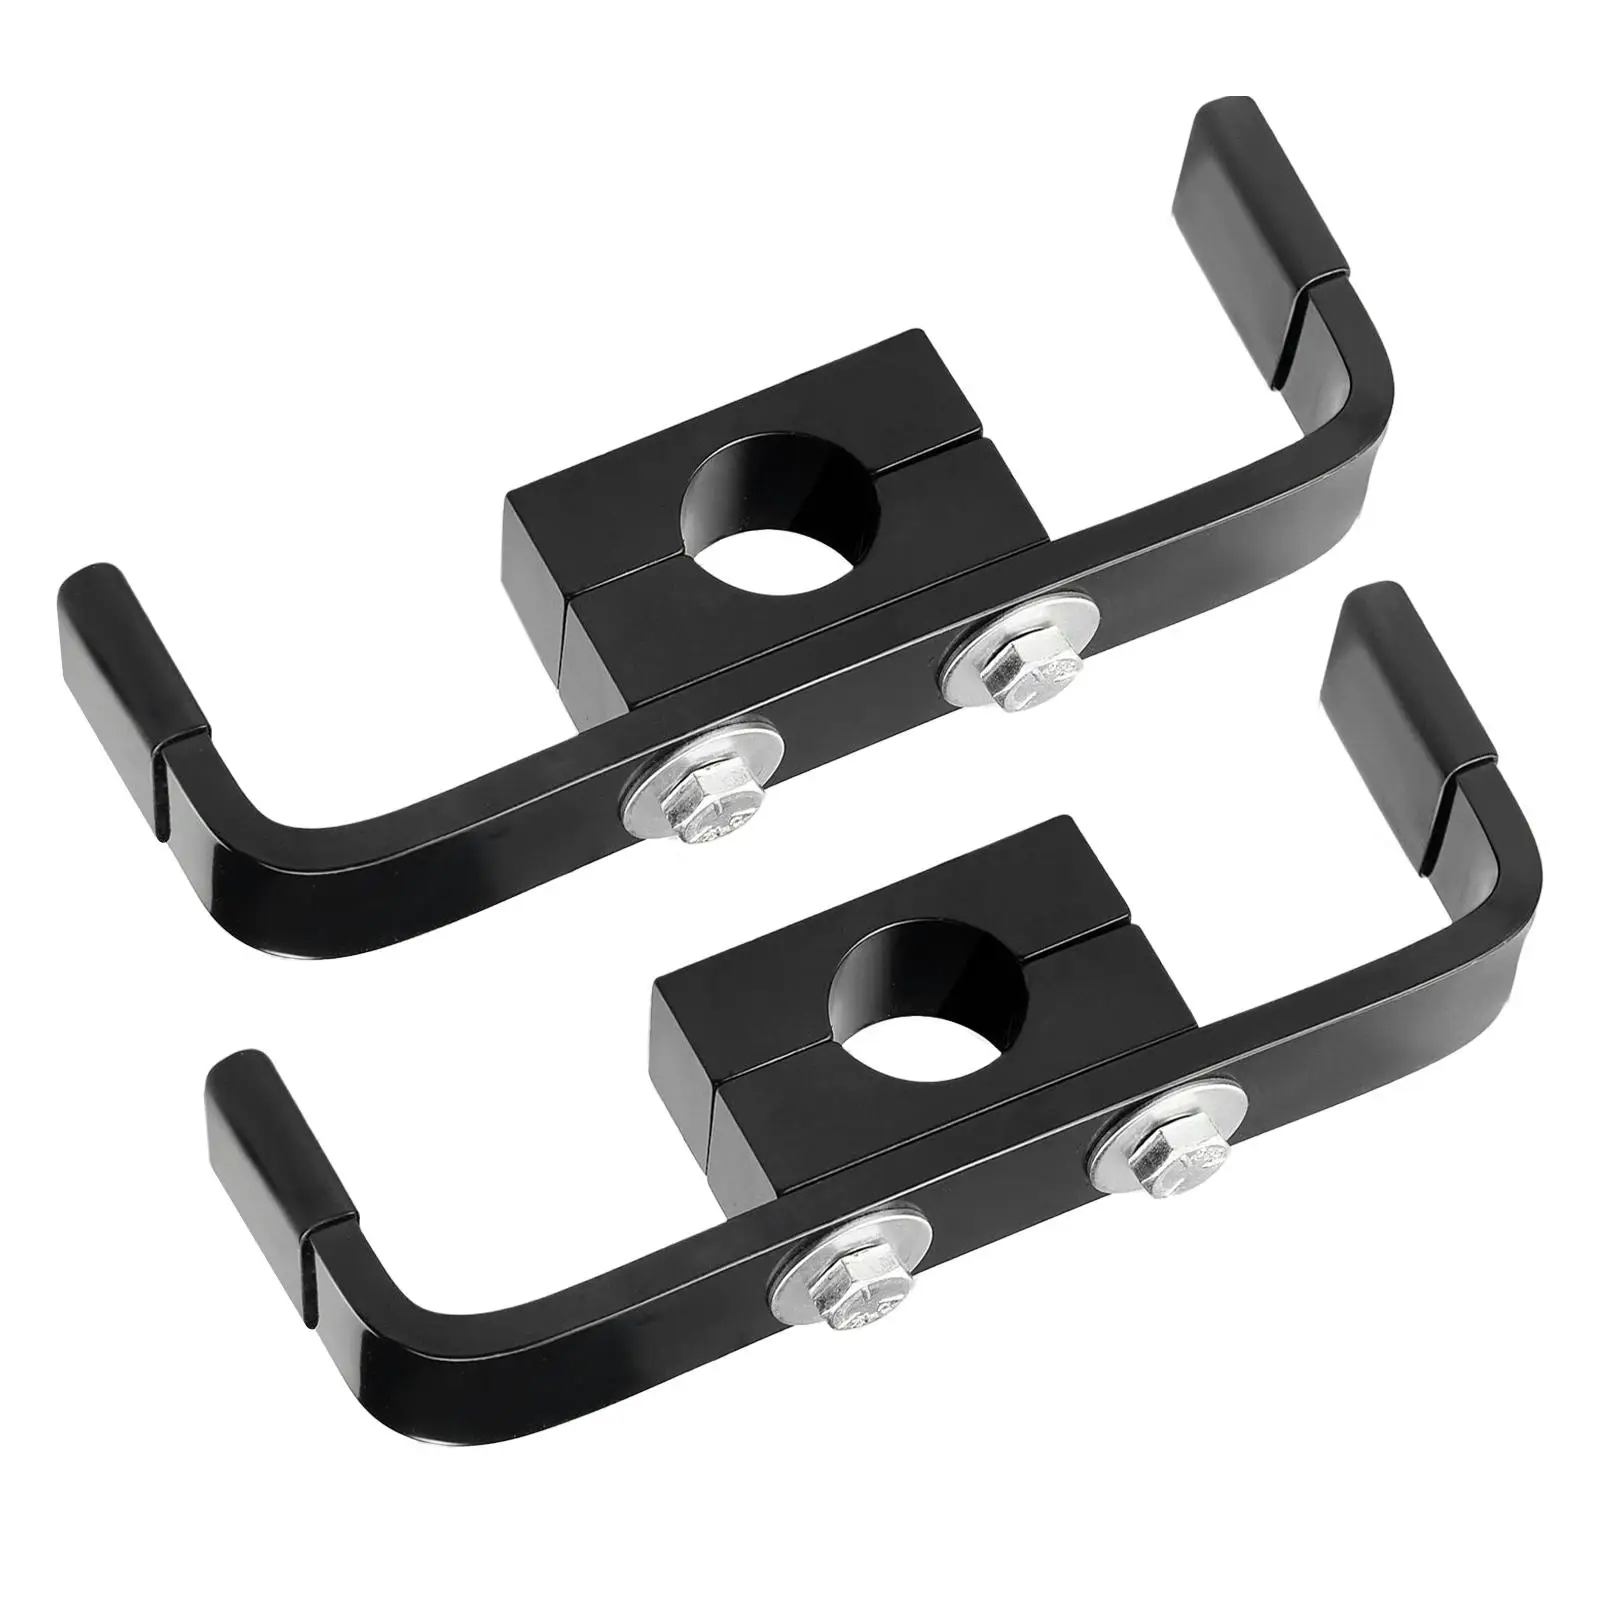 1 Pair Camshaft Holding Tool for Ford 6.8L V10 High Performance Accessories Car Premium